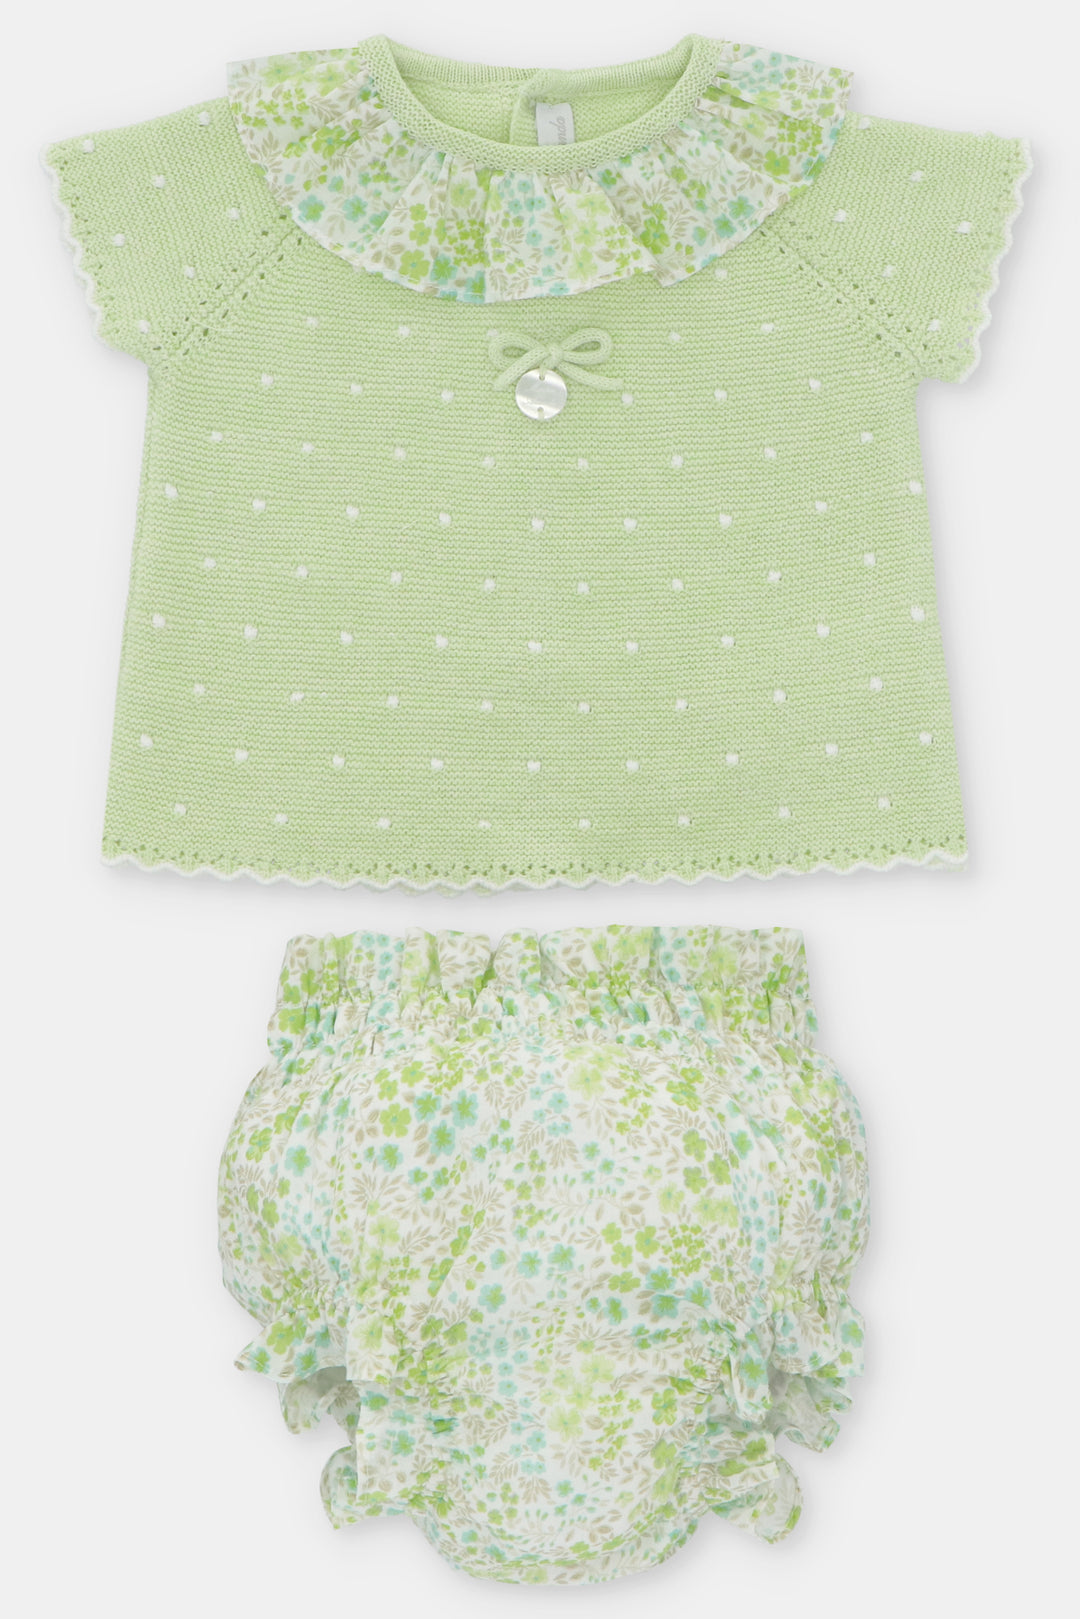 Martín Aranda PREORDER "Evelina" Pale Green Knit Top & Floral Bloomers | Millie and John